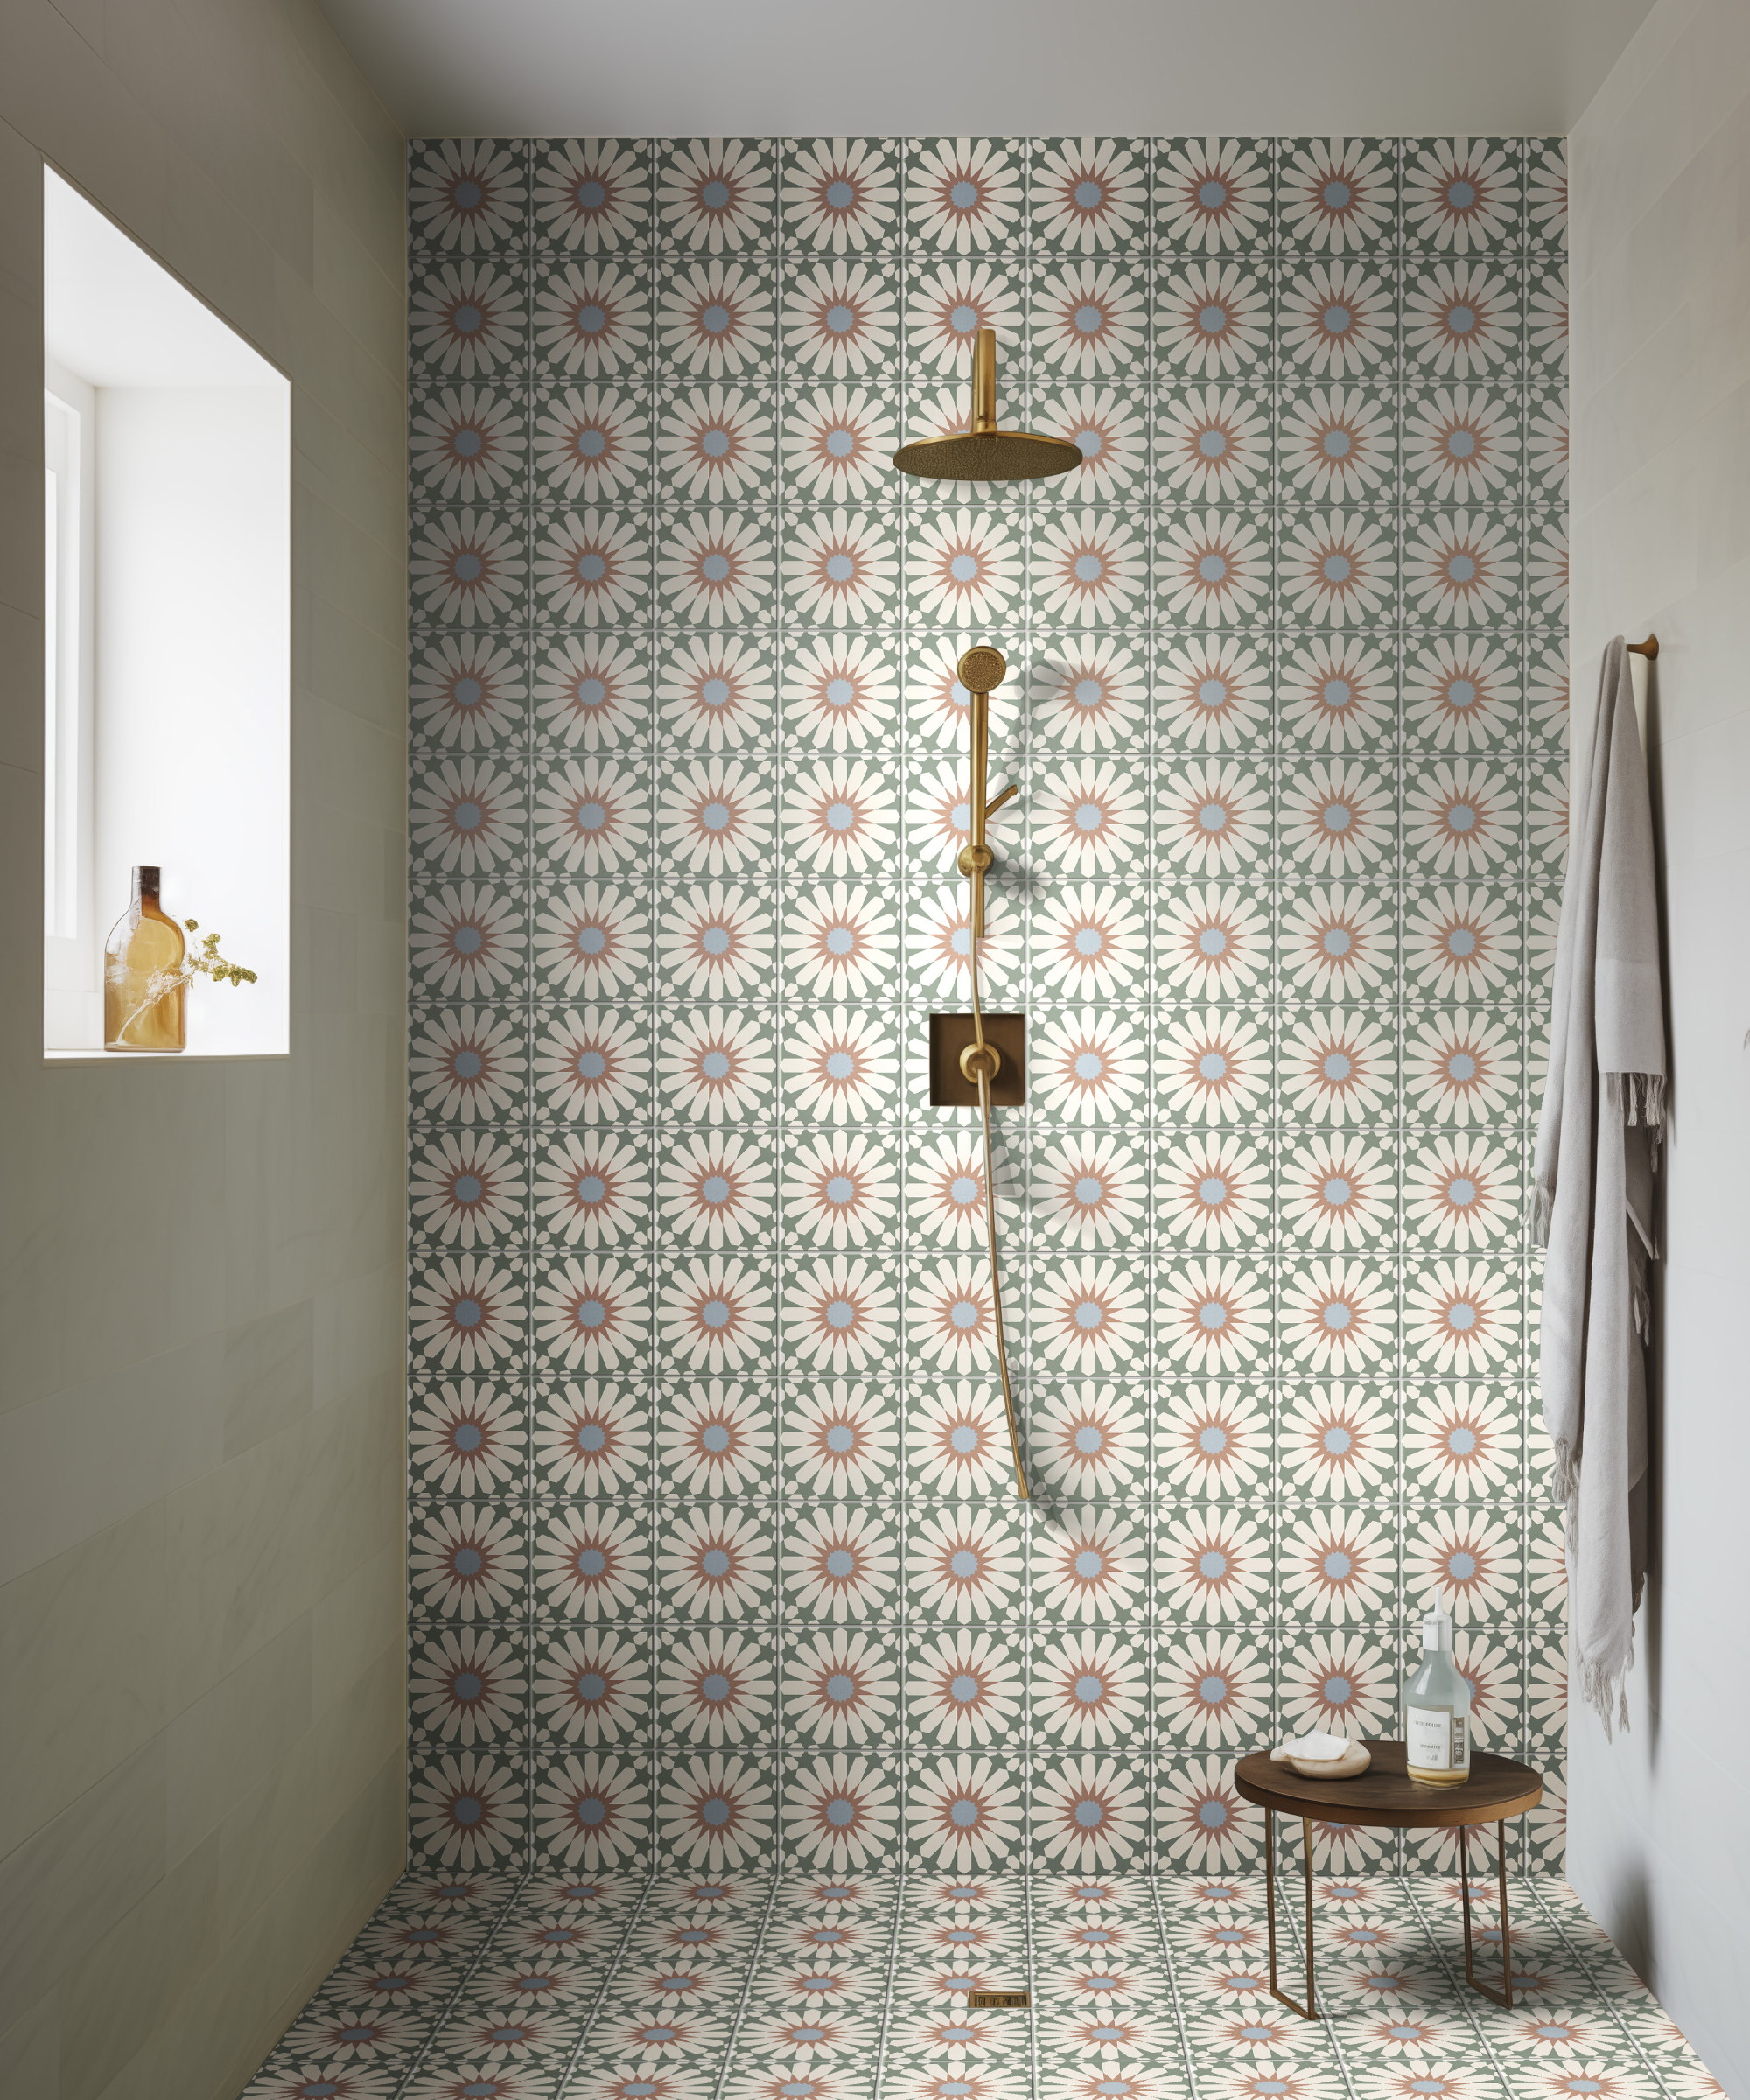 wet room with pastel patterned tiles and painted wall